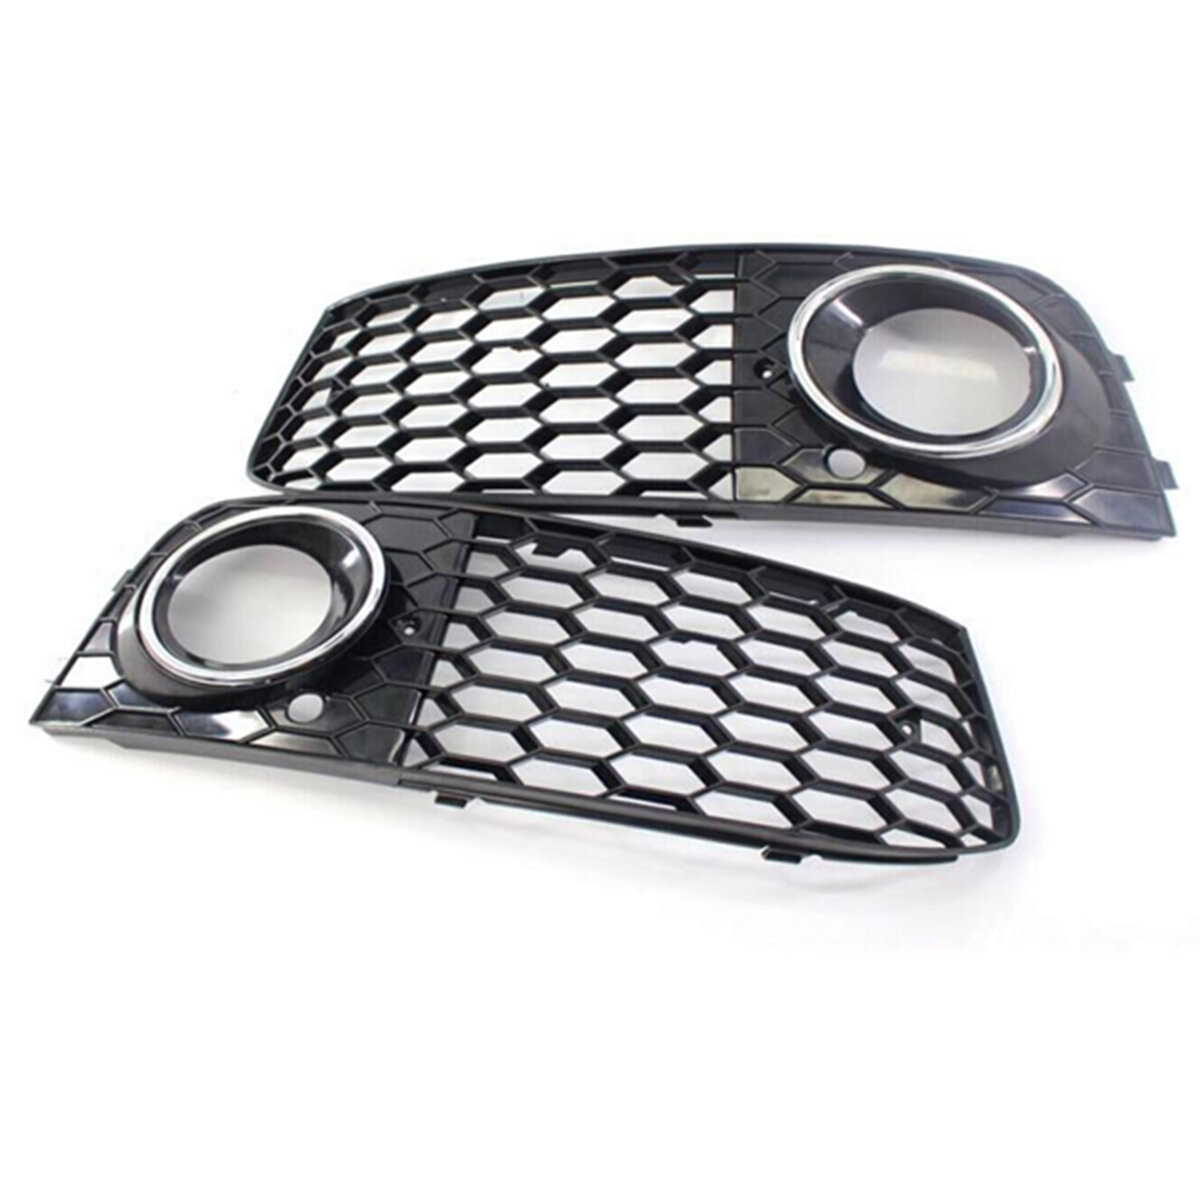 Pair Glossy Black Front Bumper Fog Light Grille  Grill Cover For Audi A4 B8 RS4 style 2009-2012